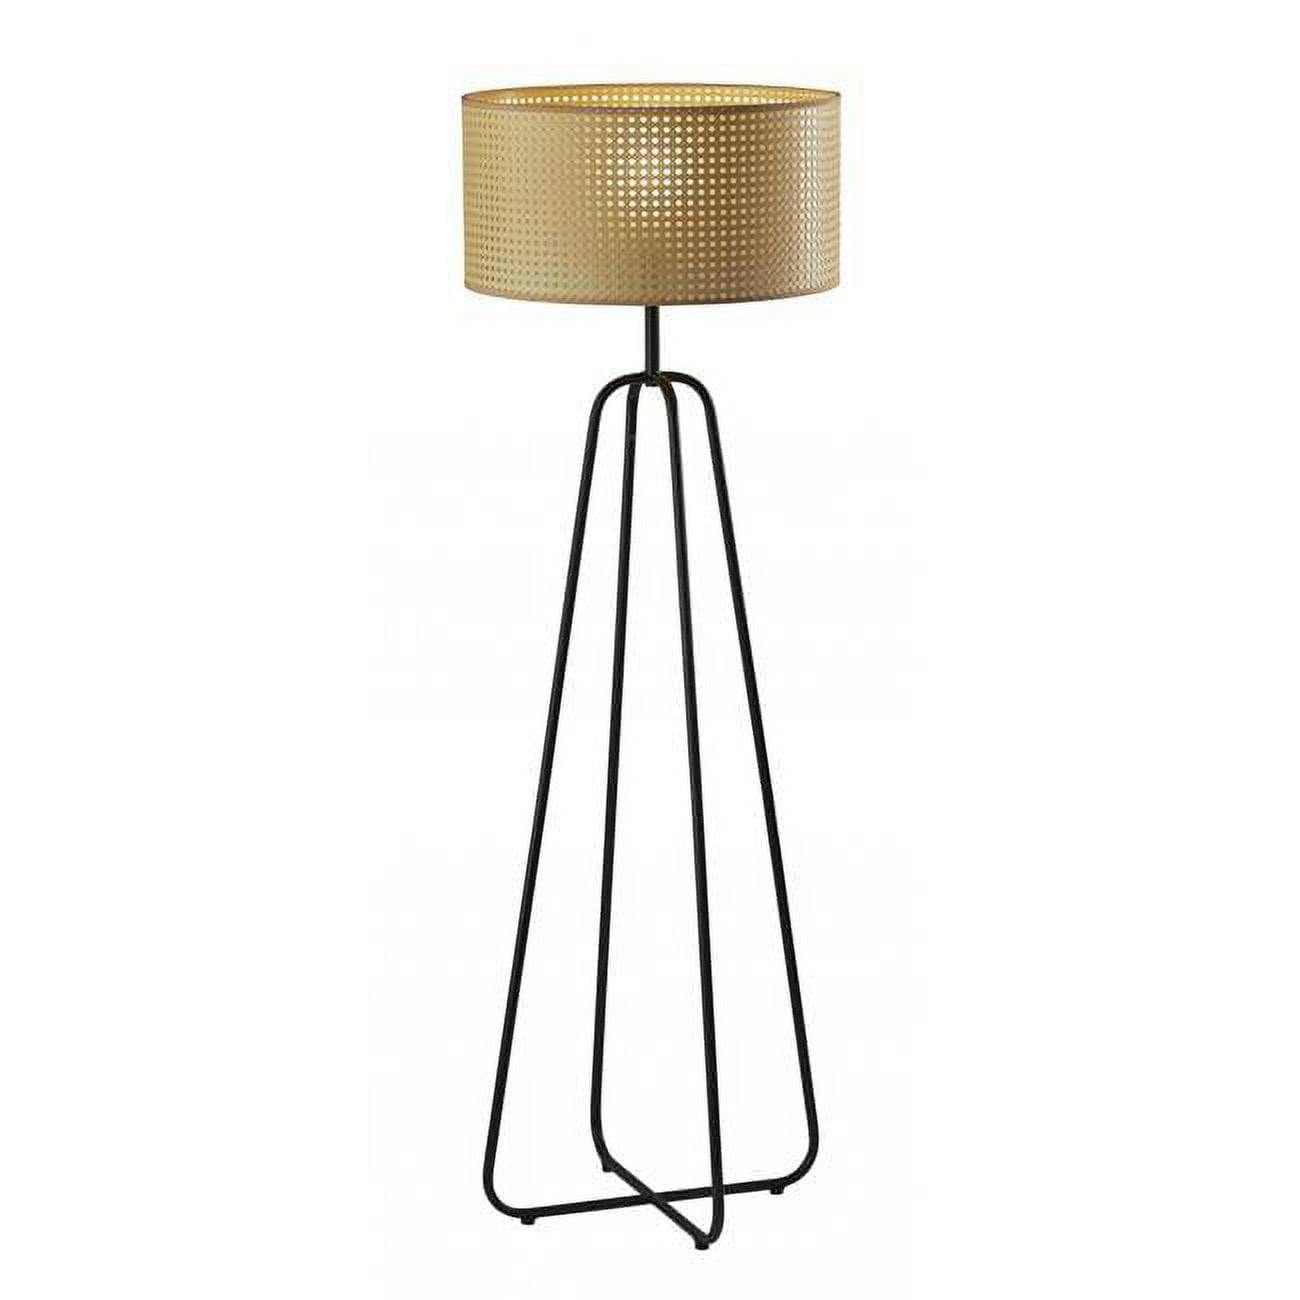 Bohemian Bronze Base Floor Lamp with Open Cane Shade, 58"